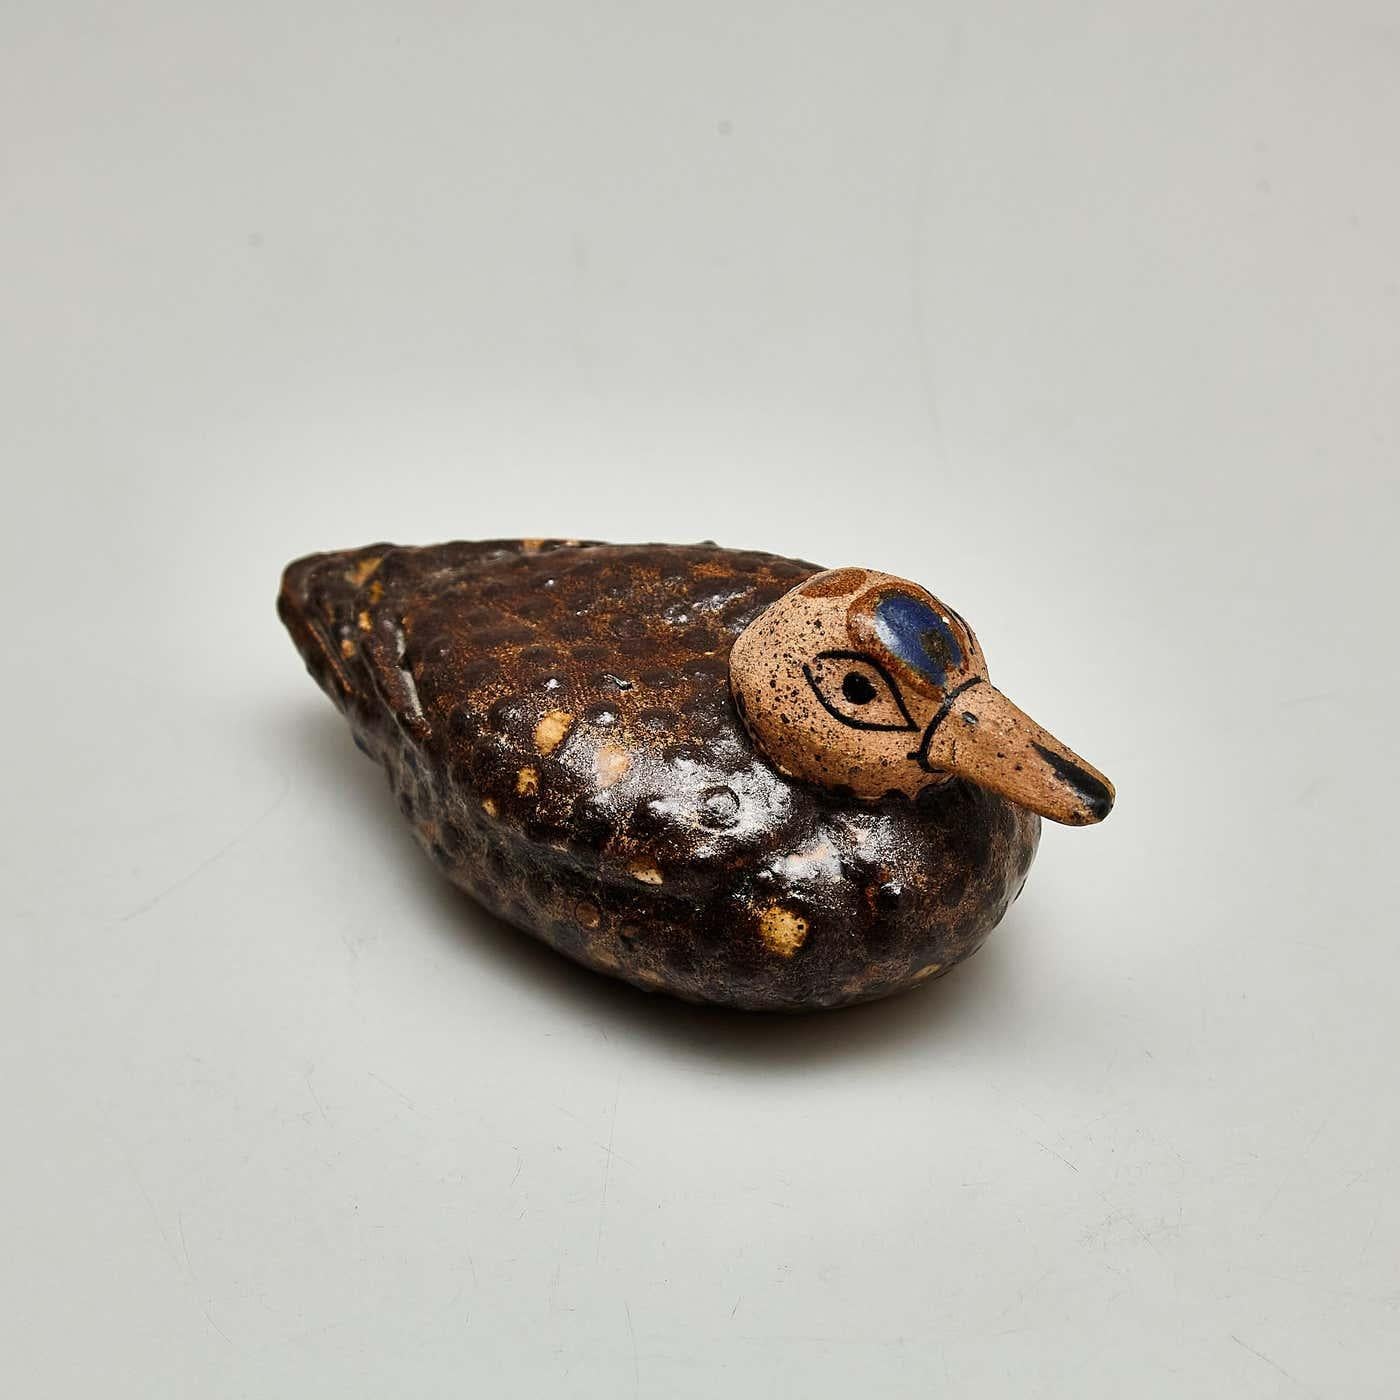 Embrace the rustic charm of this traditional and primitive ceramic sculpture, meticulously hand-painted to capture the essence of a duck. This delightful piece embodies the spirit of Naif art with its simplicity and heartfelt quality.

Crafted with